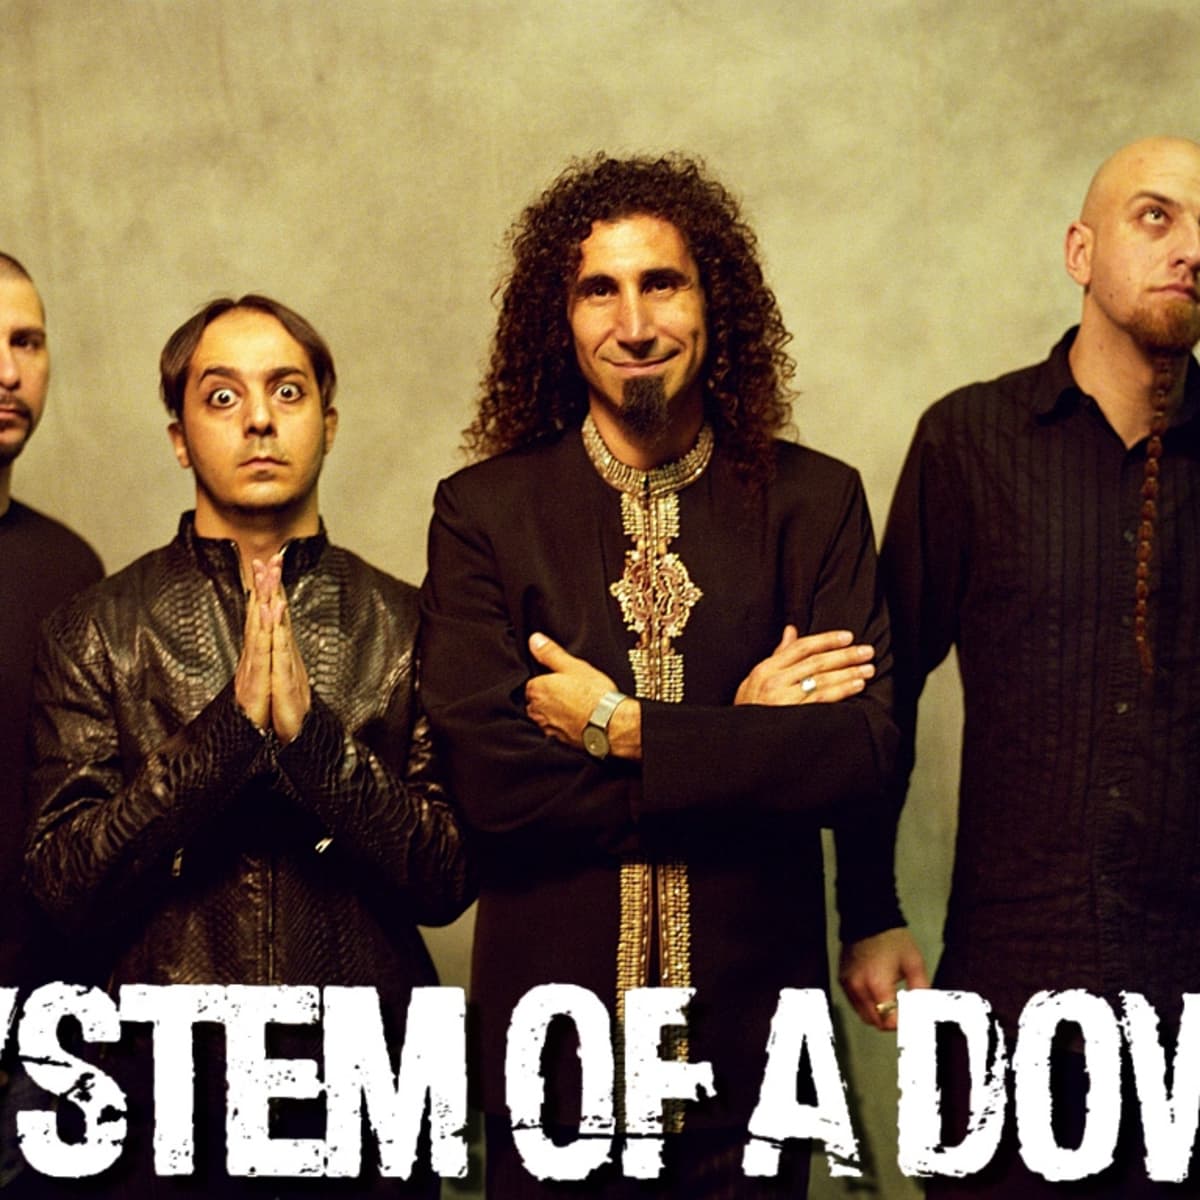 system of a down album sell